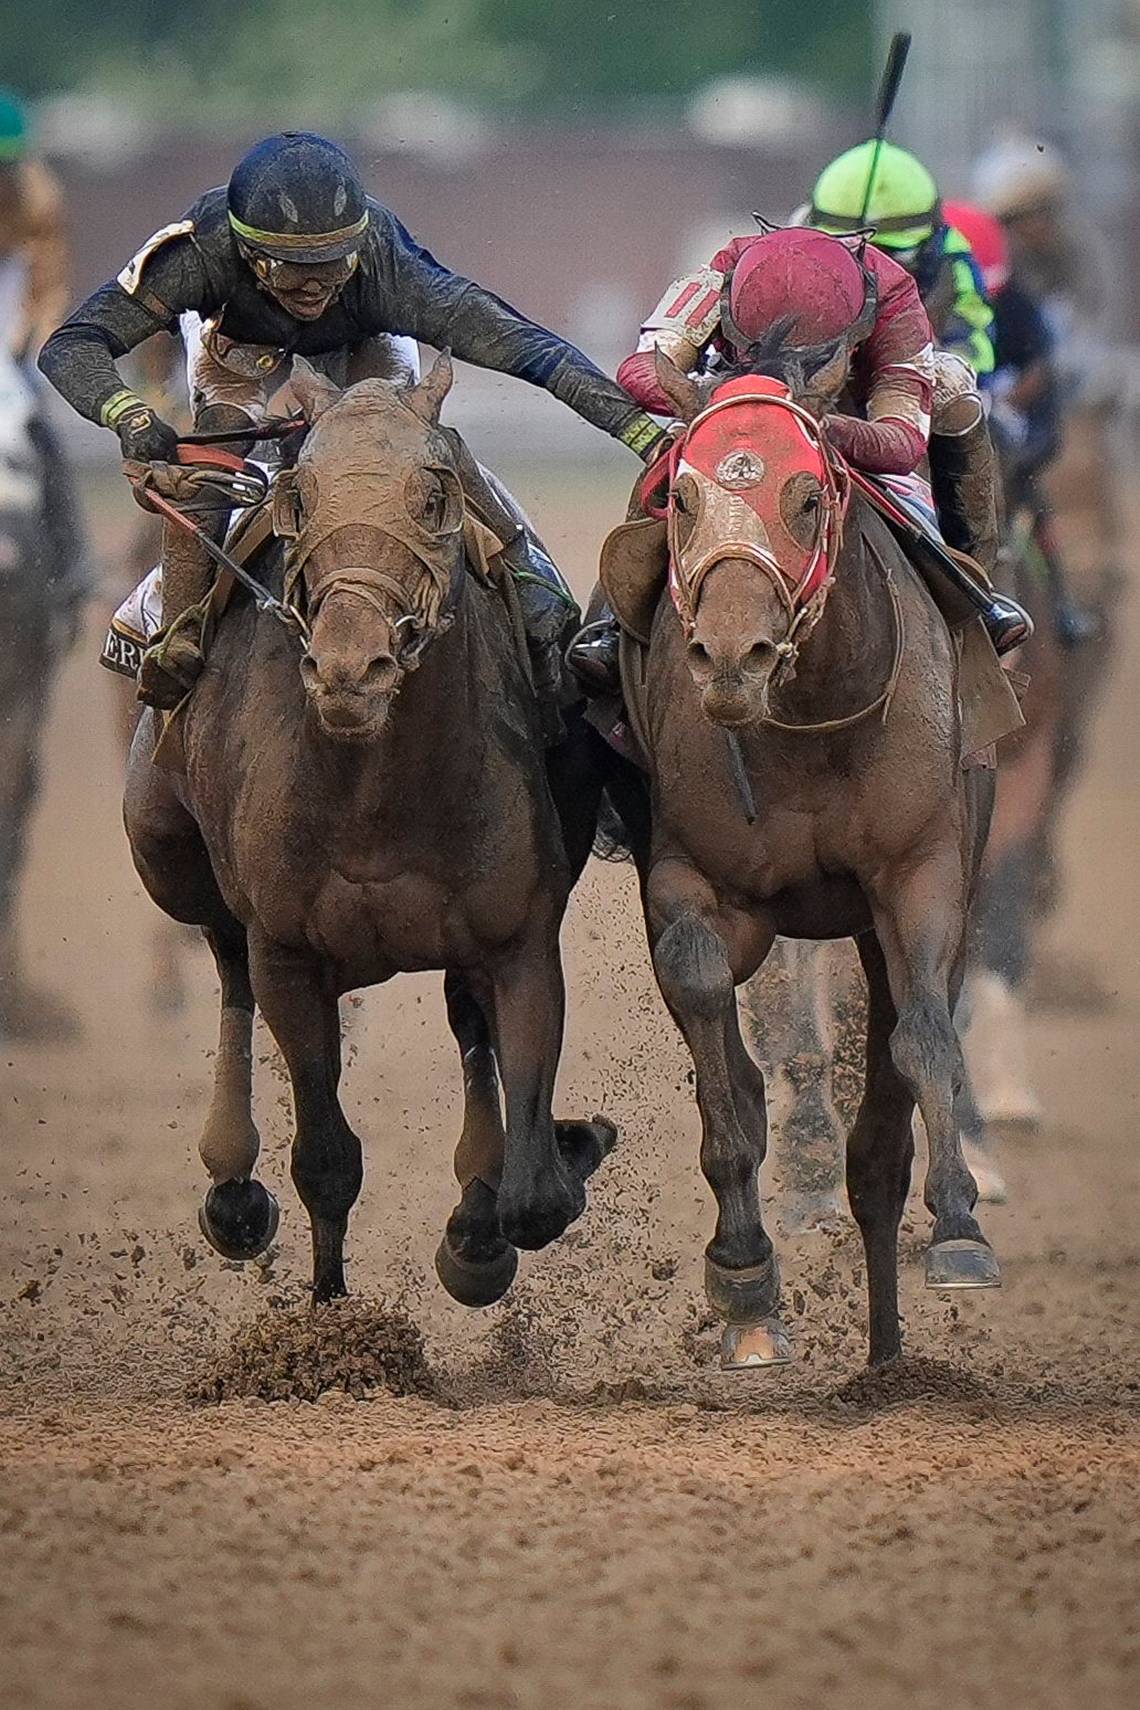 Kentucky Derby stretch duel under review by Racing Commission despite no objections filed